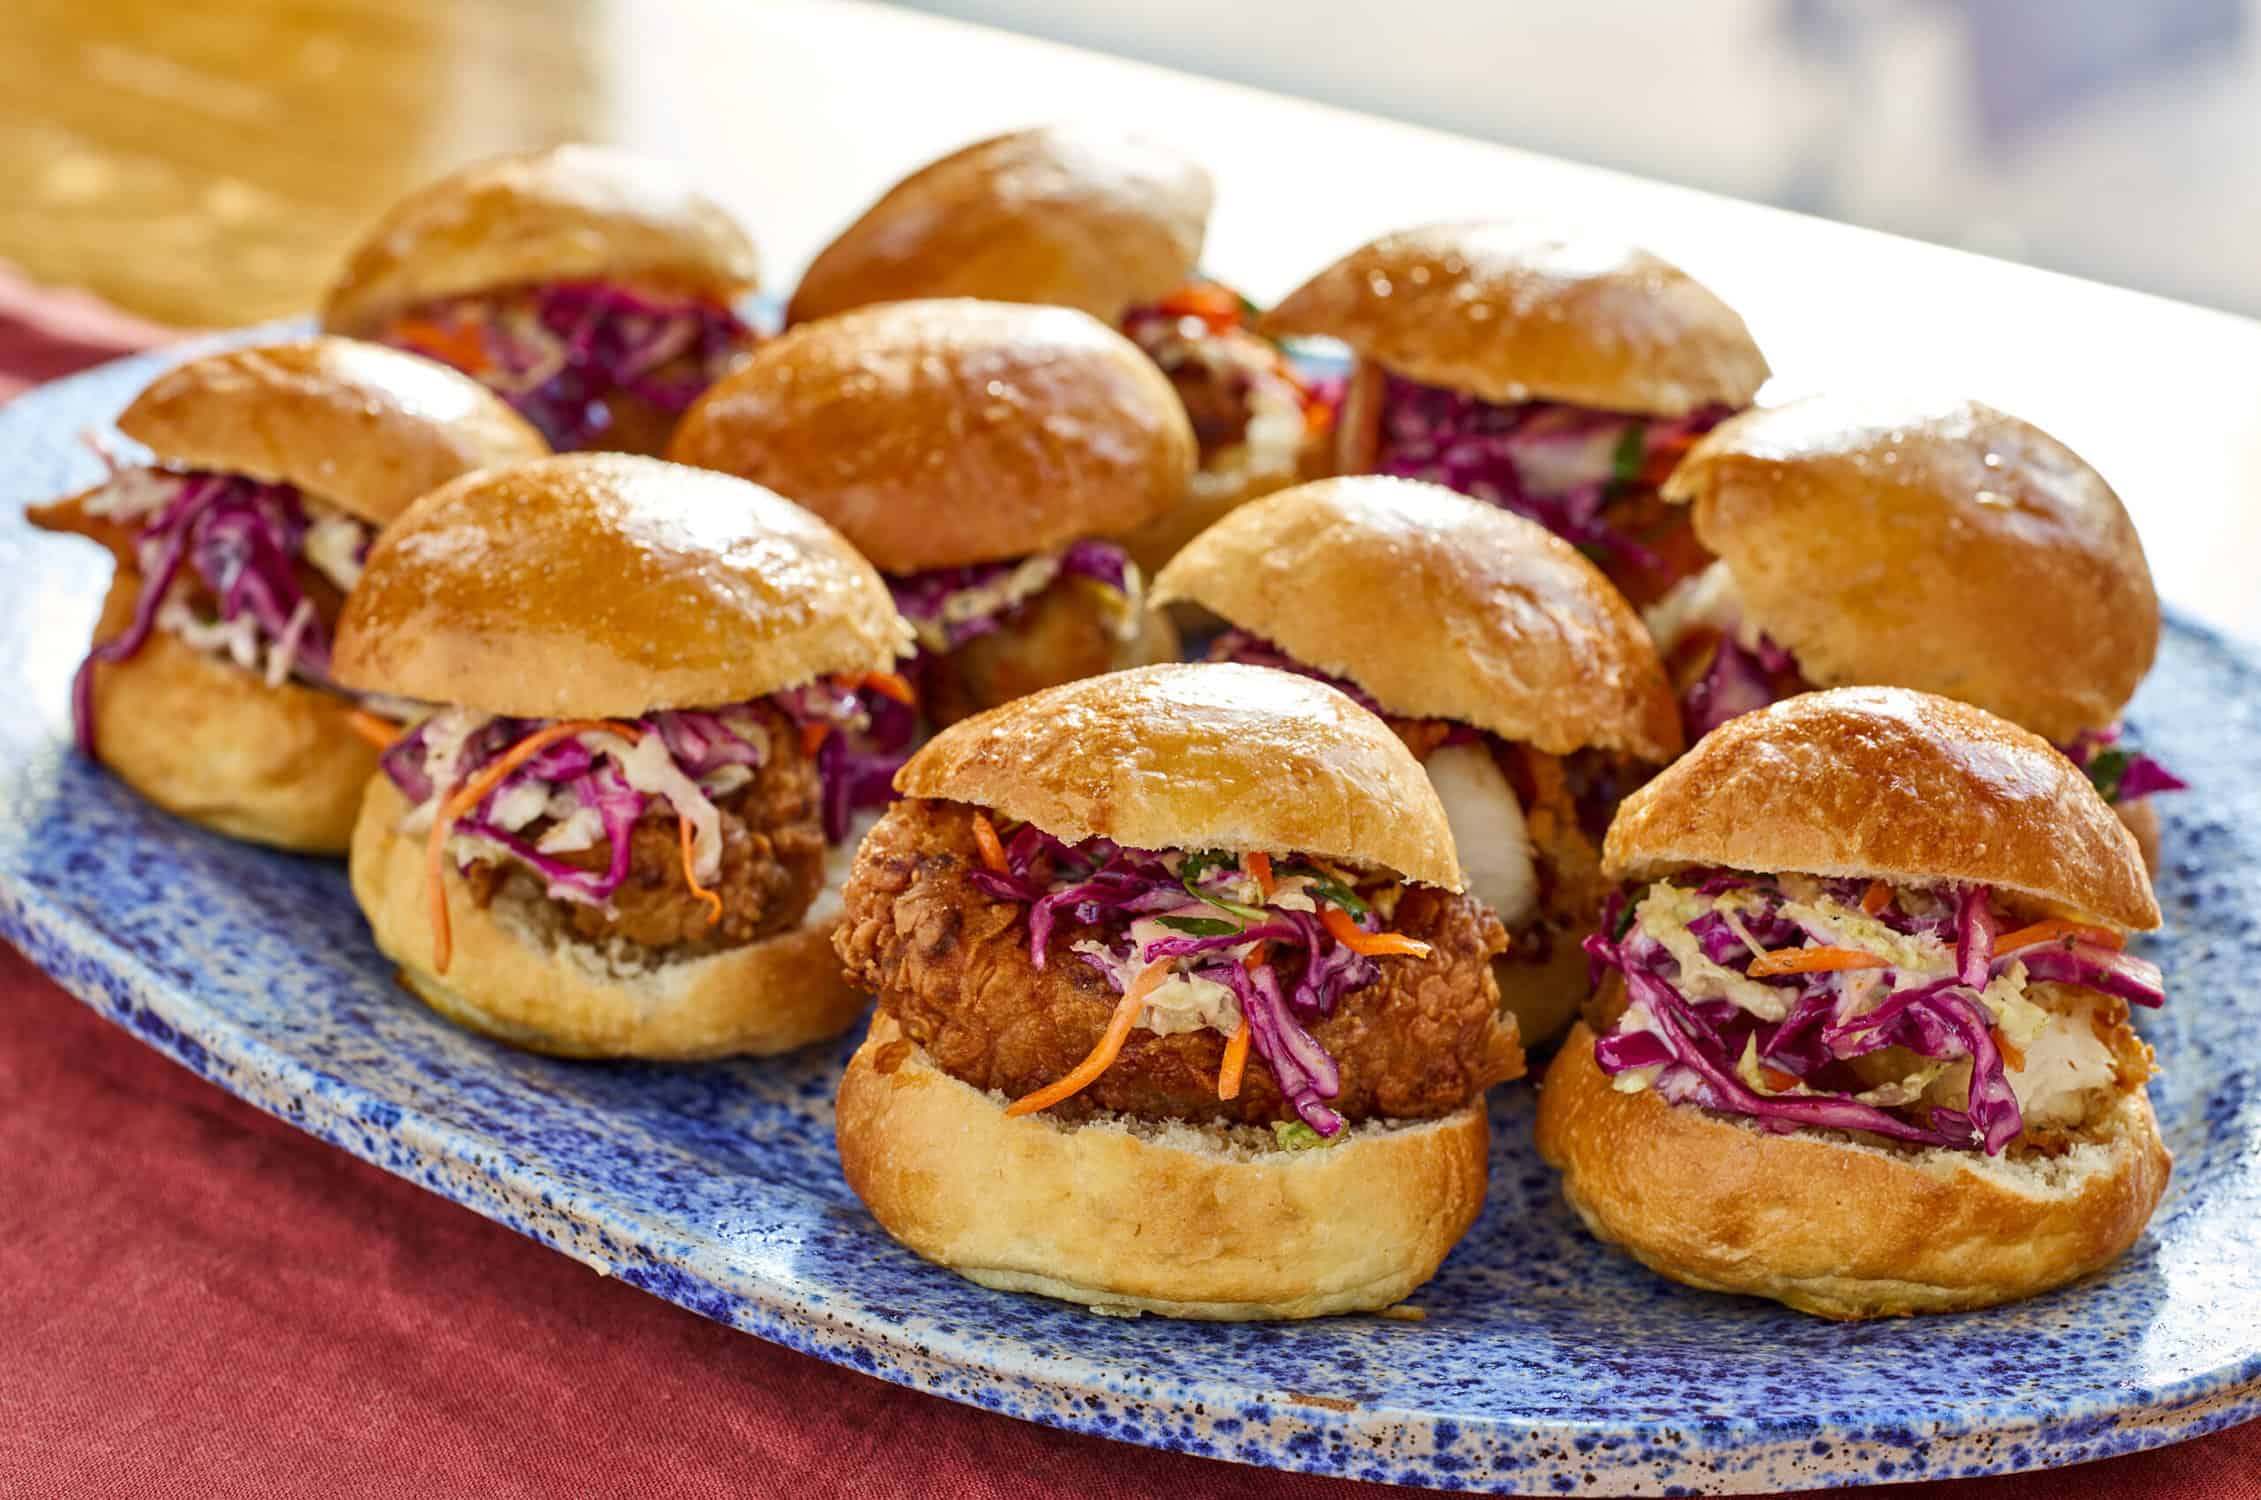 a tray of Huckleberry's famous fried chicken sliders with cole slaw and brioche buns